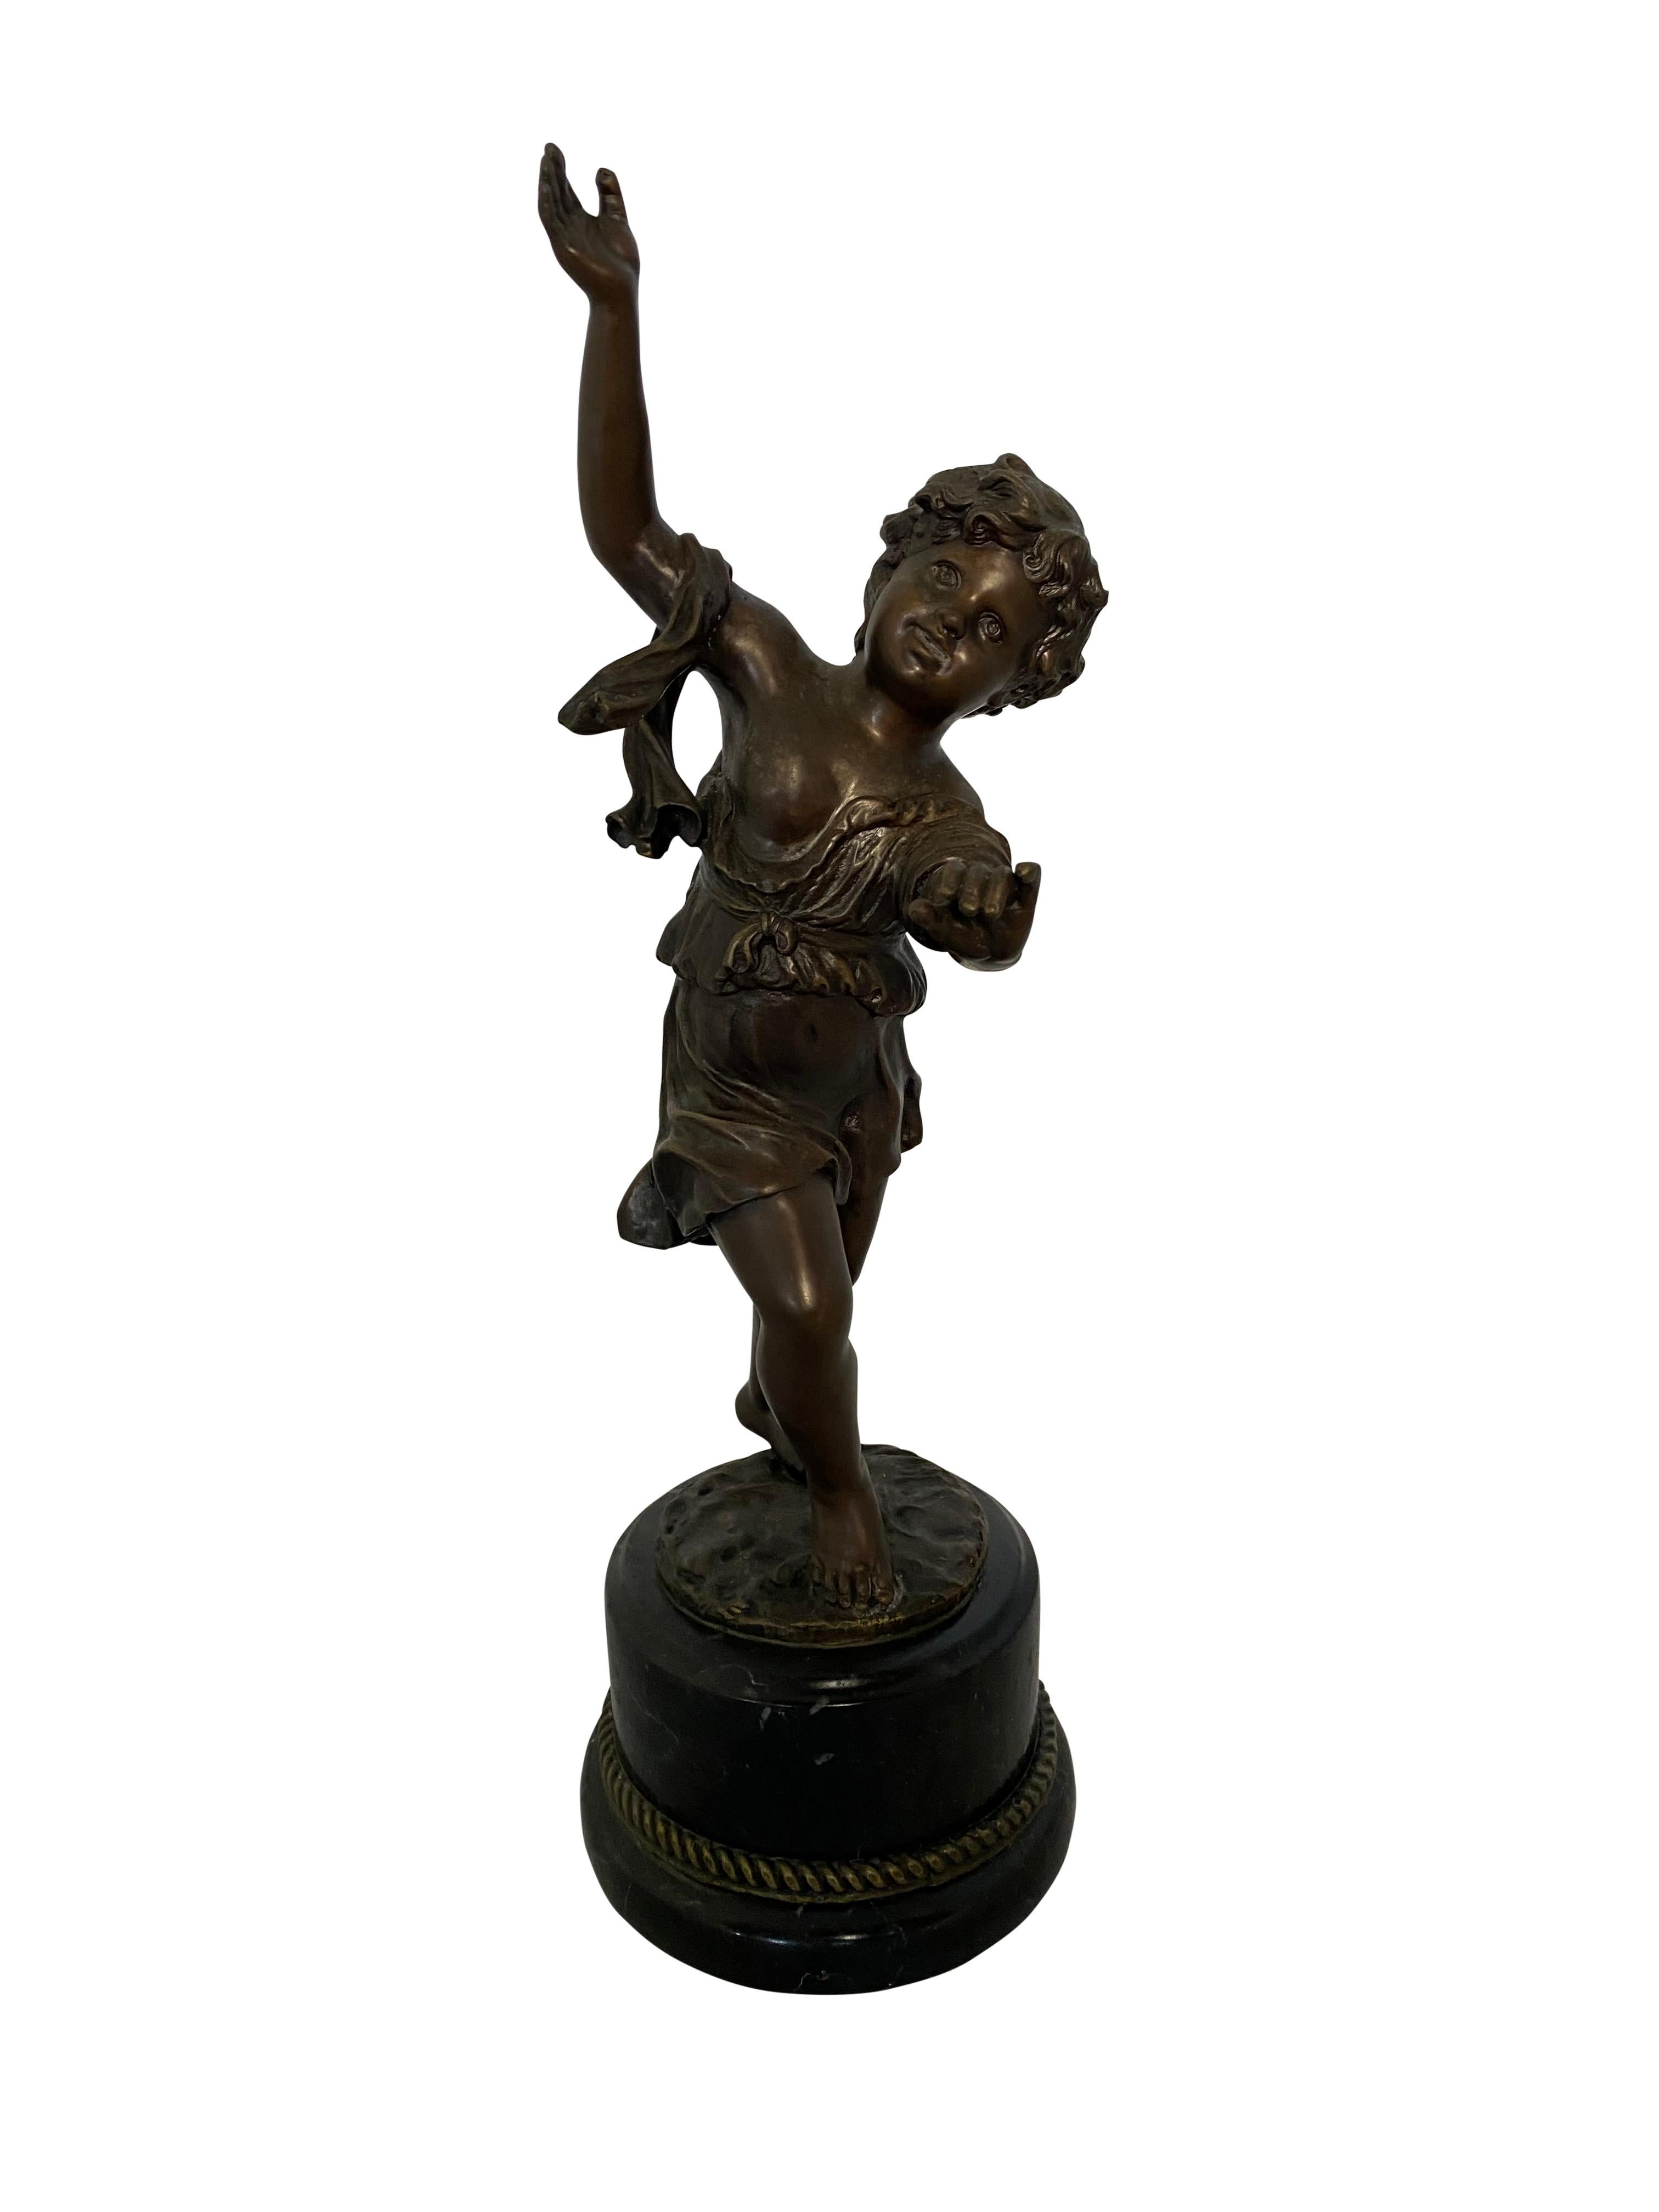 A bronze, whimsically musical-themed Cherub statue with marble base. The dancing Cherub base has a detailed ground carving with embroidered bronze rope at the bottom, 20th century.

Dimensions (cm):
H 40, W 6, D 6.